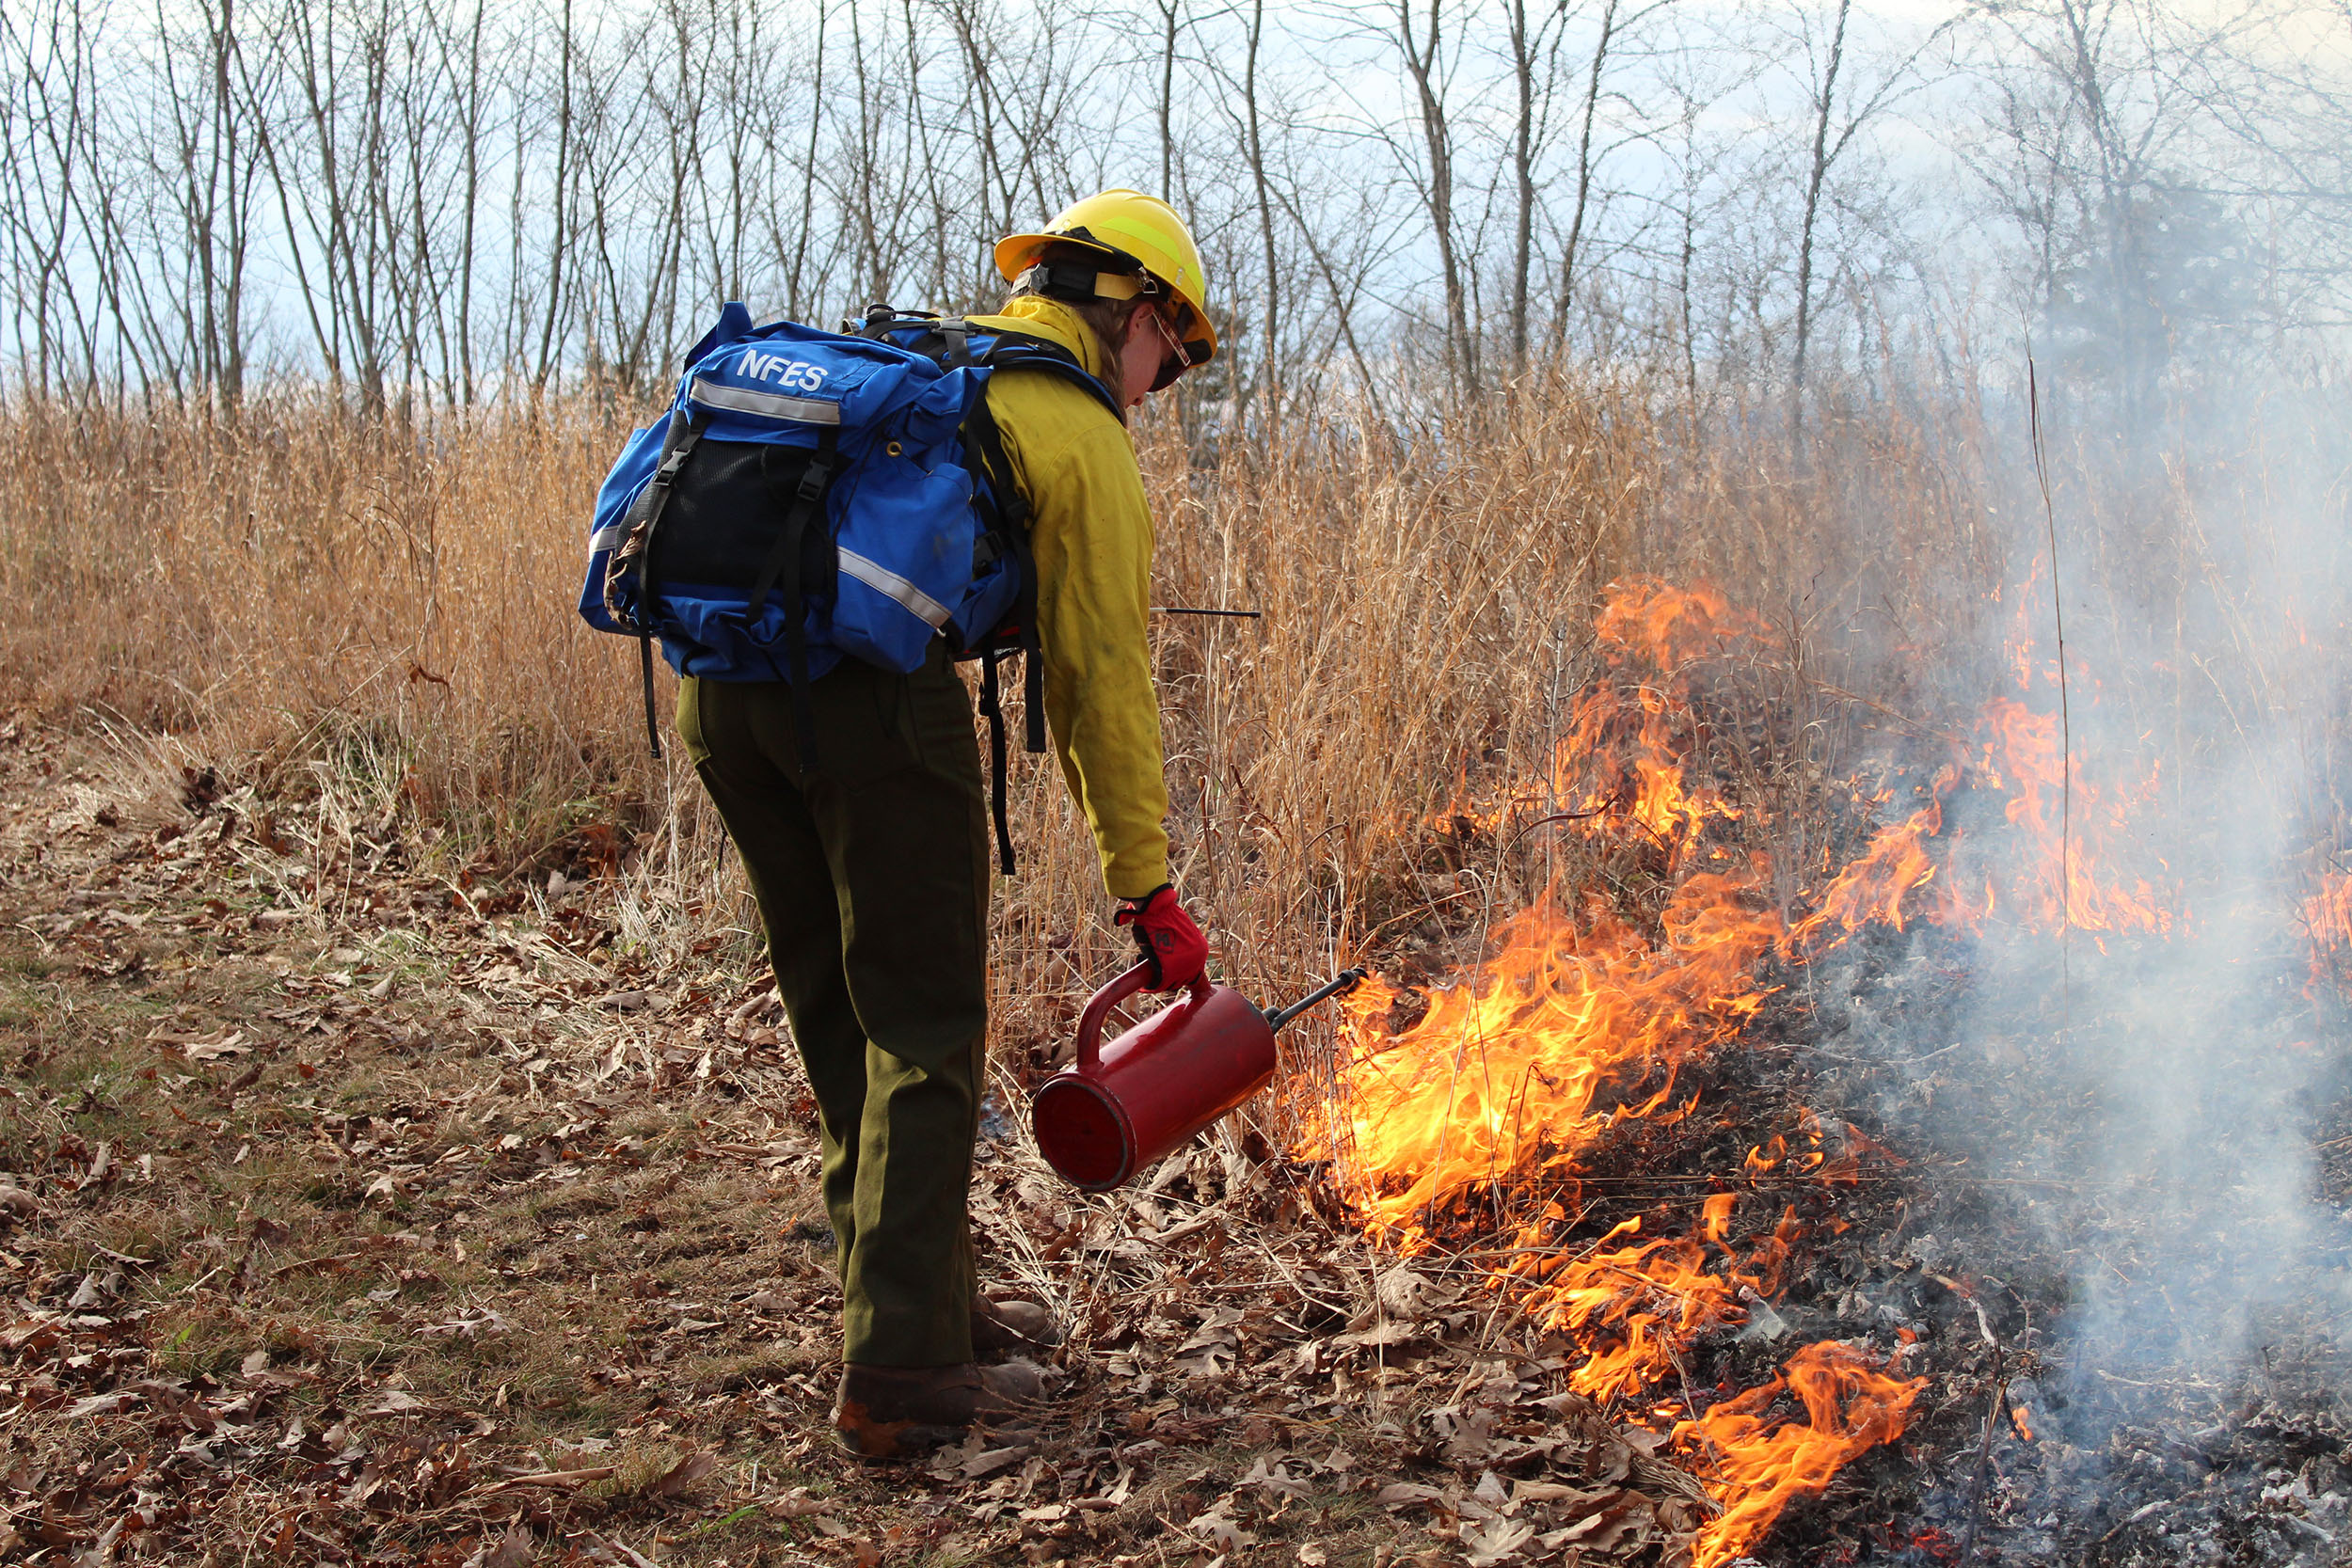 Student Emily Newcombe uses a drip torch to ignite brush along the established fire line